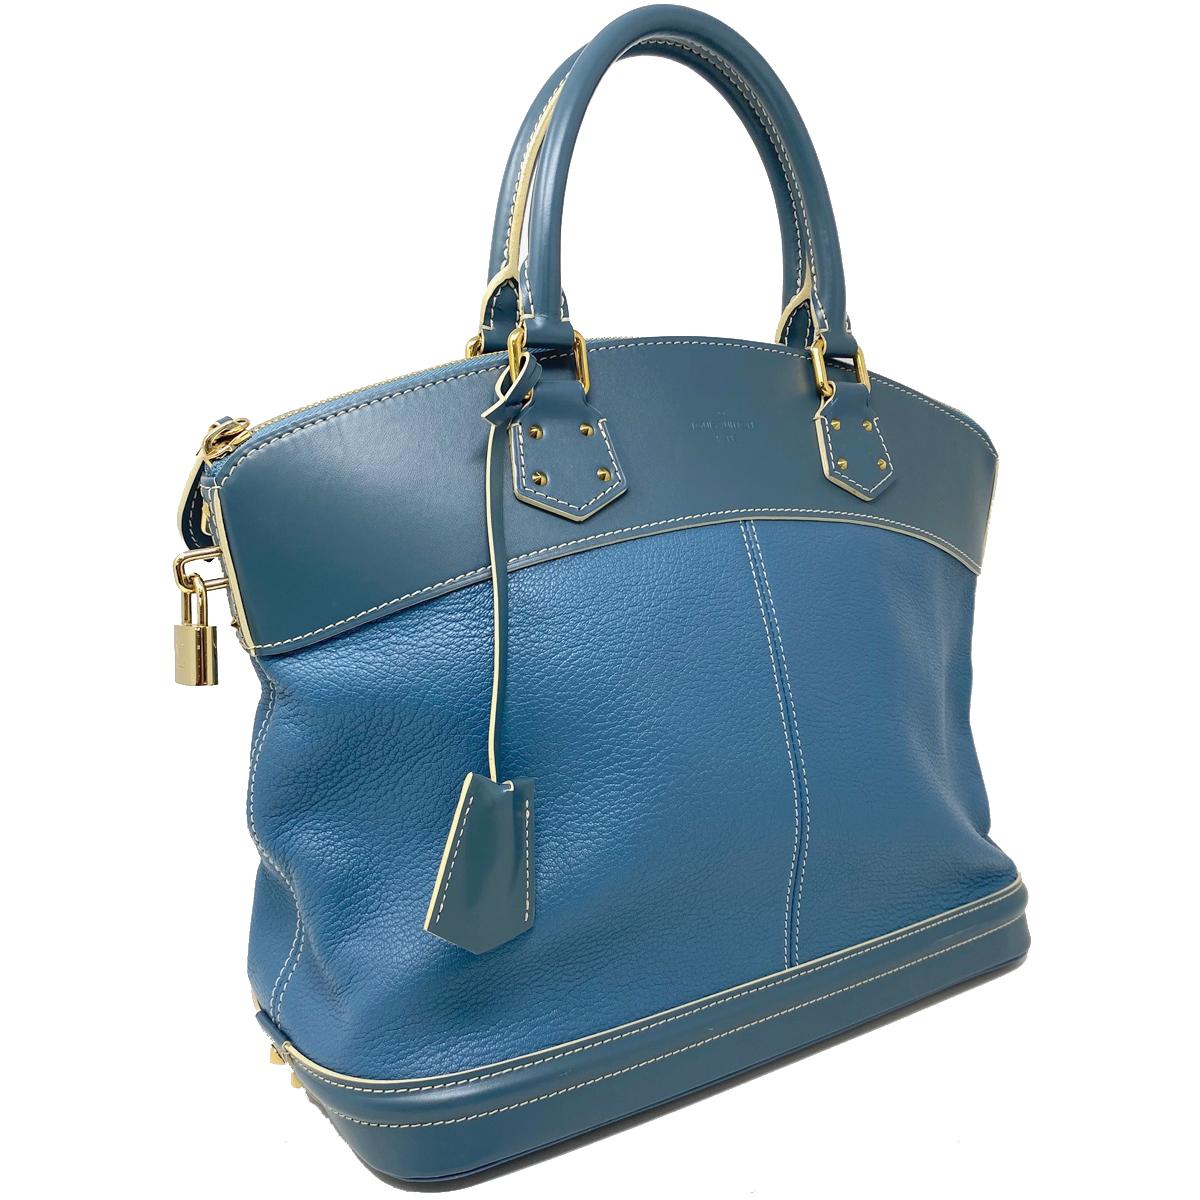 Company-Louis Vuitton 
Style-Suhali MM Lockit Blue Leather Tote Handbag  
Outside -No rips, tears or stains
Inside-No Rips , tears or stains  
Pockets-Interior pockets only 
Handles/ Straps-5